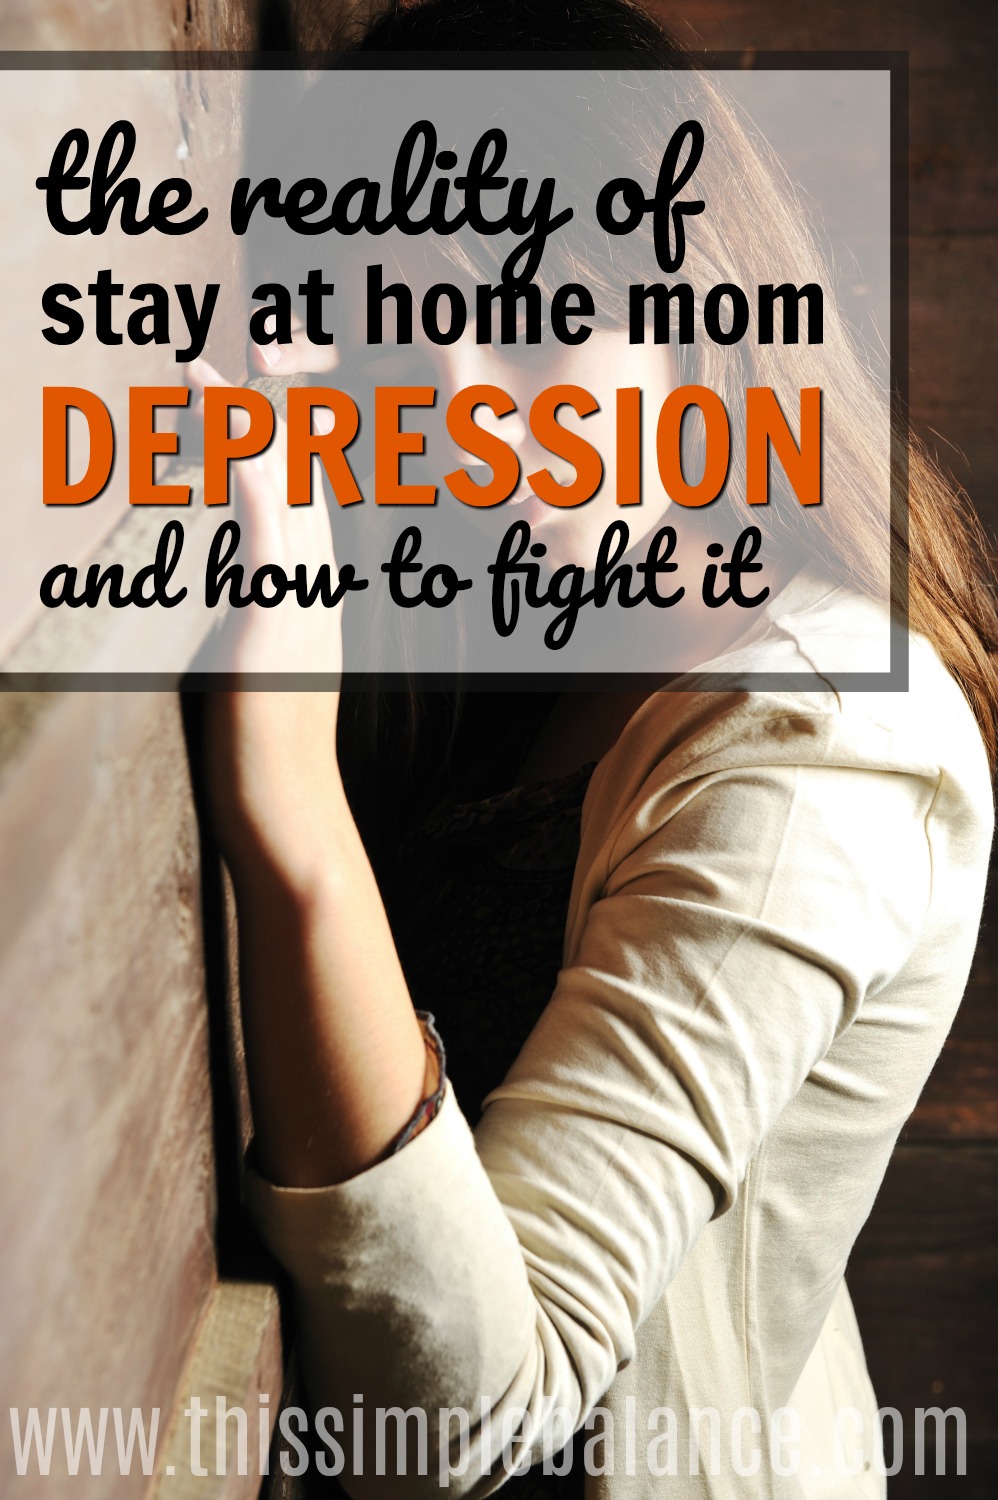 depressed mom resting her head against the wall with text overlay, "thee reality of stay at home mom depression and how to fight it"